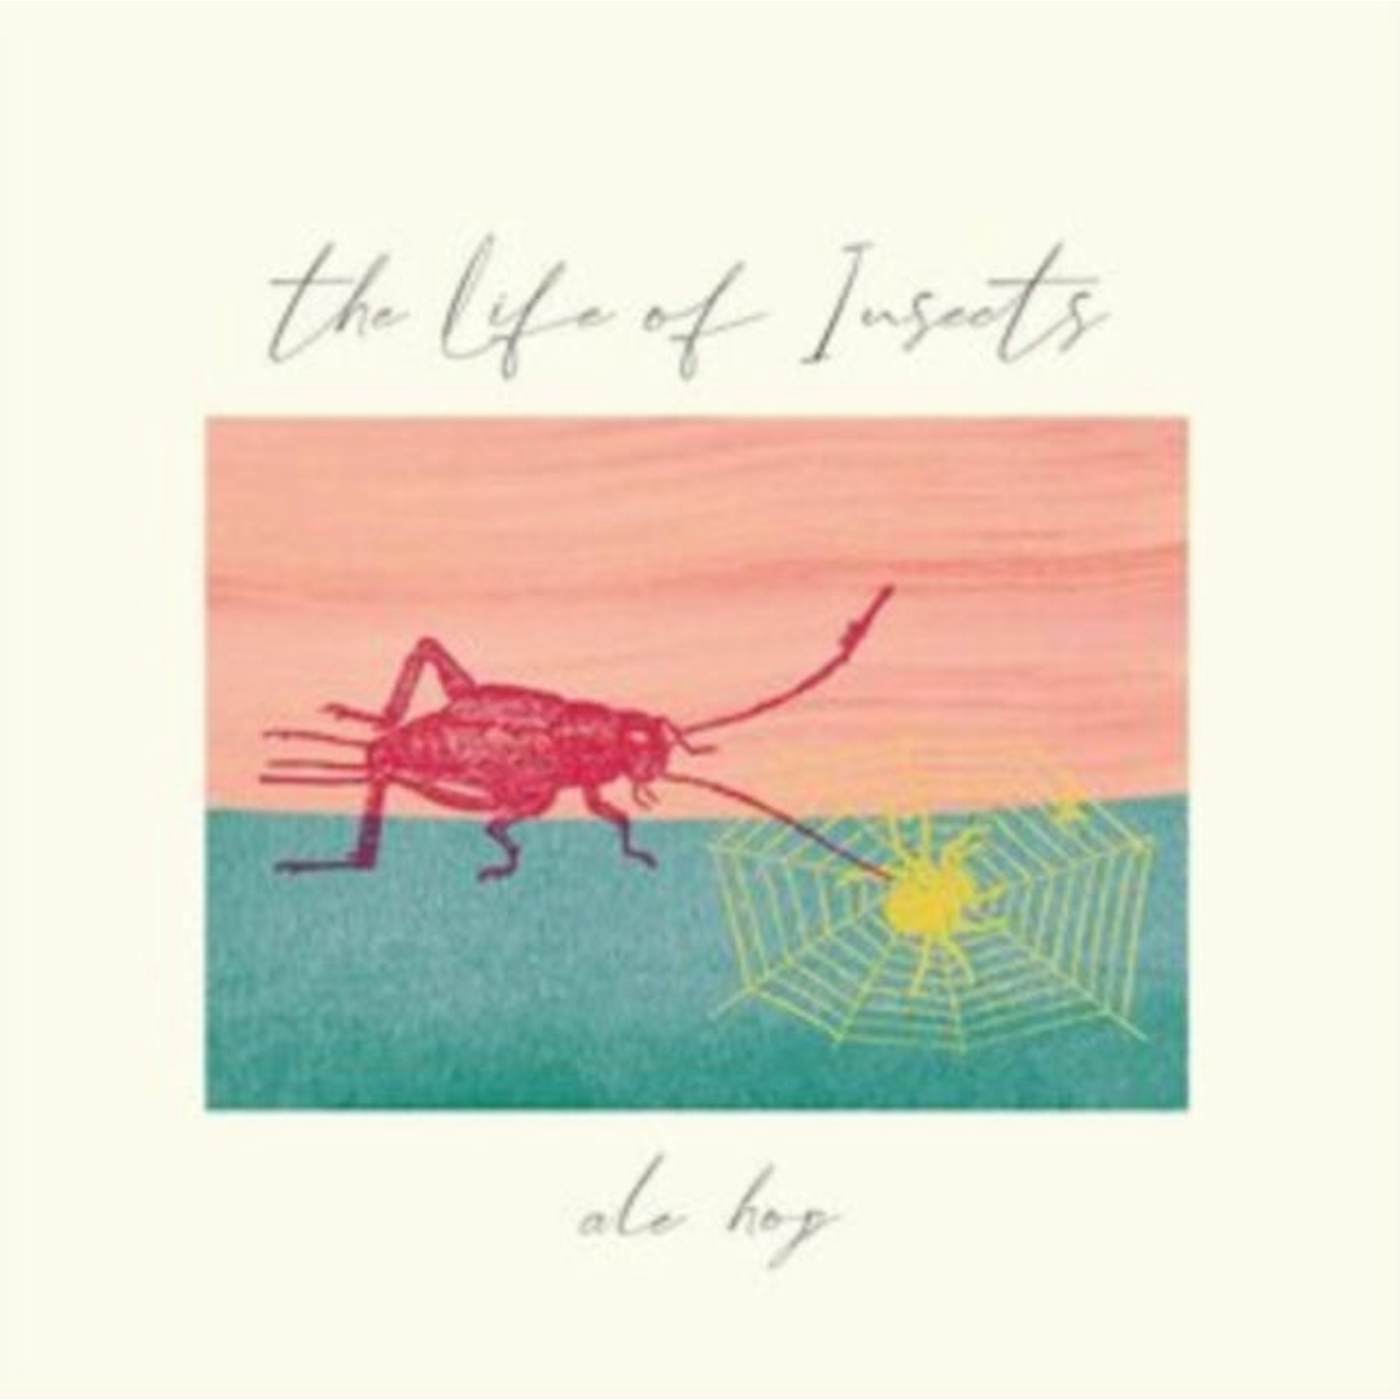 Ale Hop LP - Life Of Insects The (Vinyl)